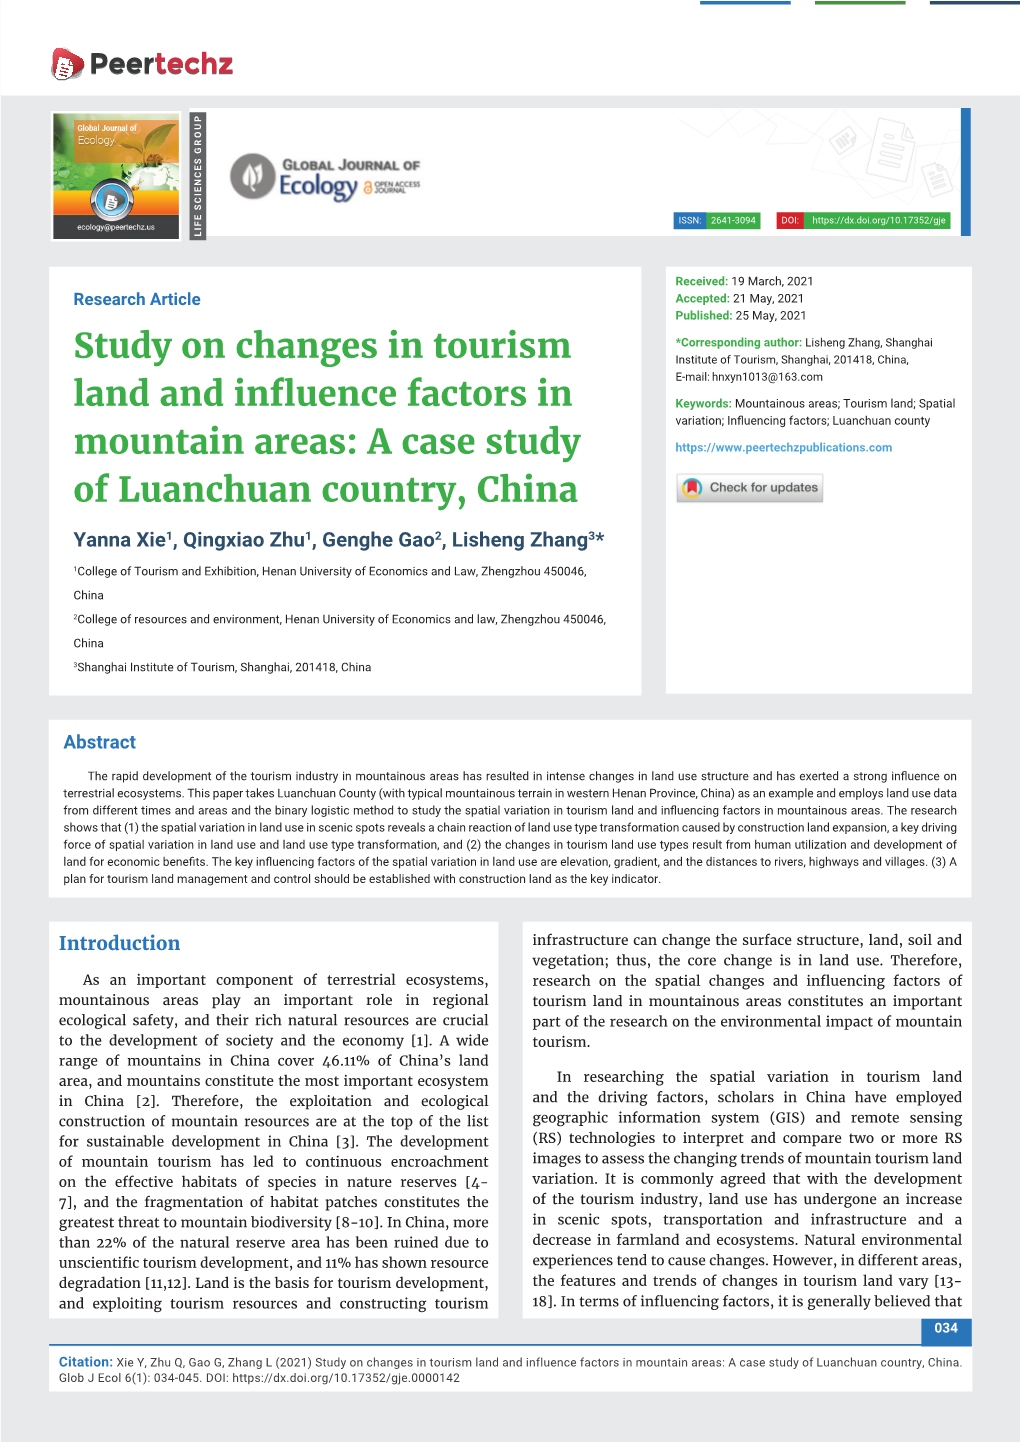 Study on Changes in Tourism Land and Influence Factors in Mountain Areas: a Case Study of Luanchuan Country, China